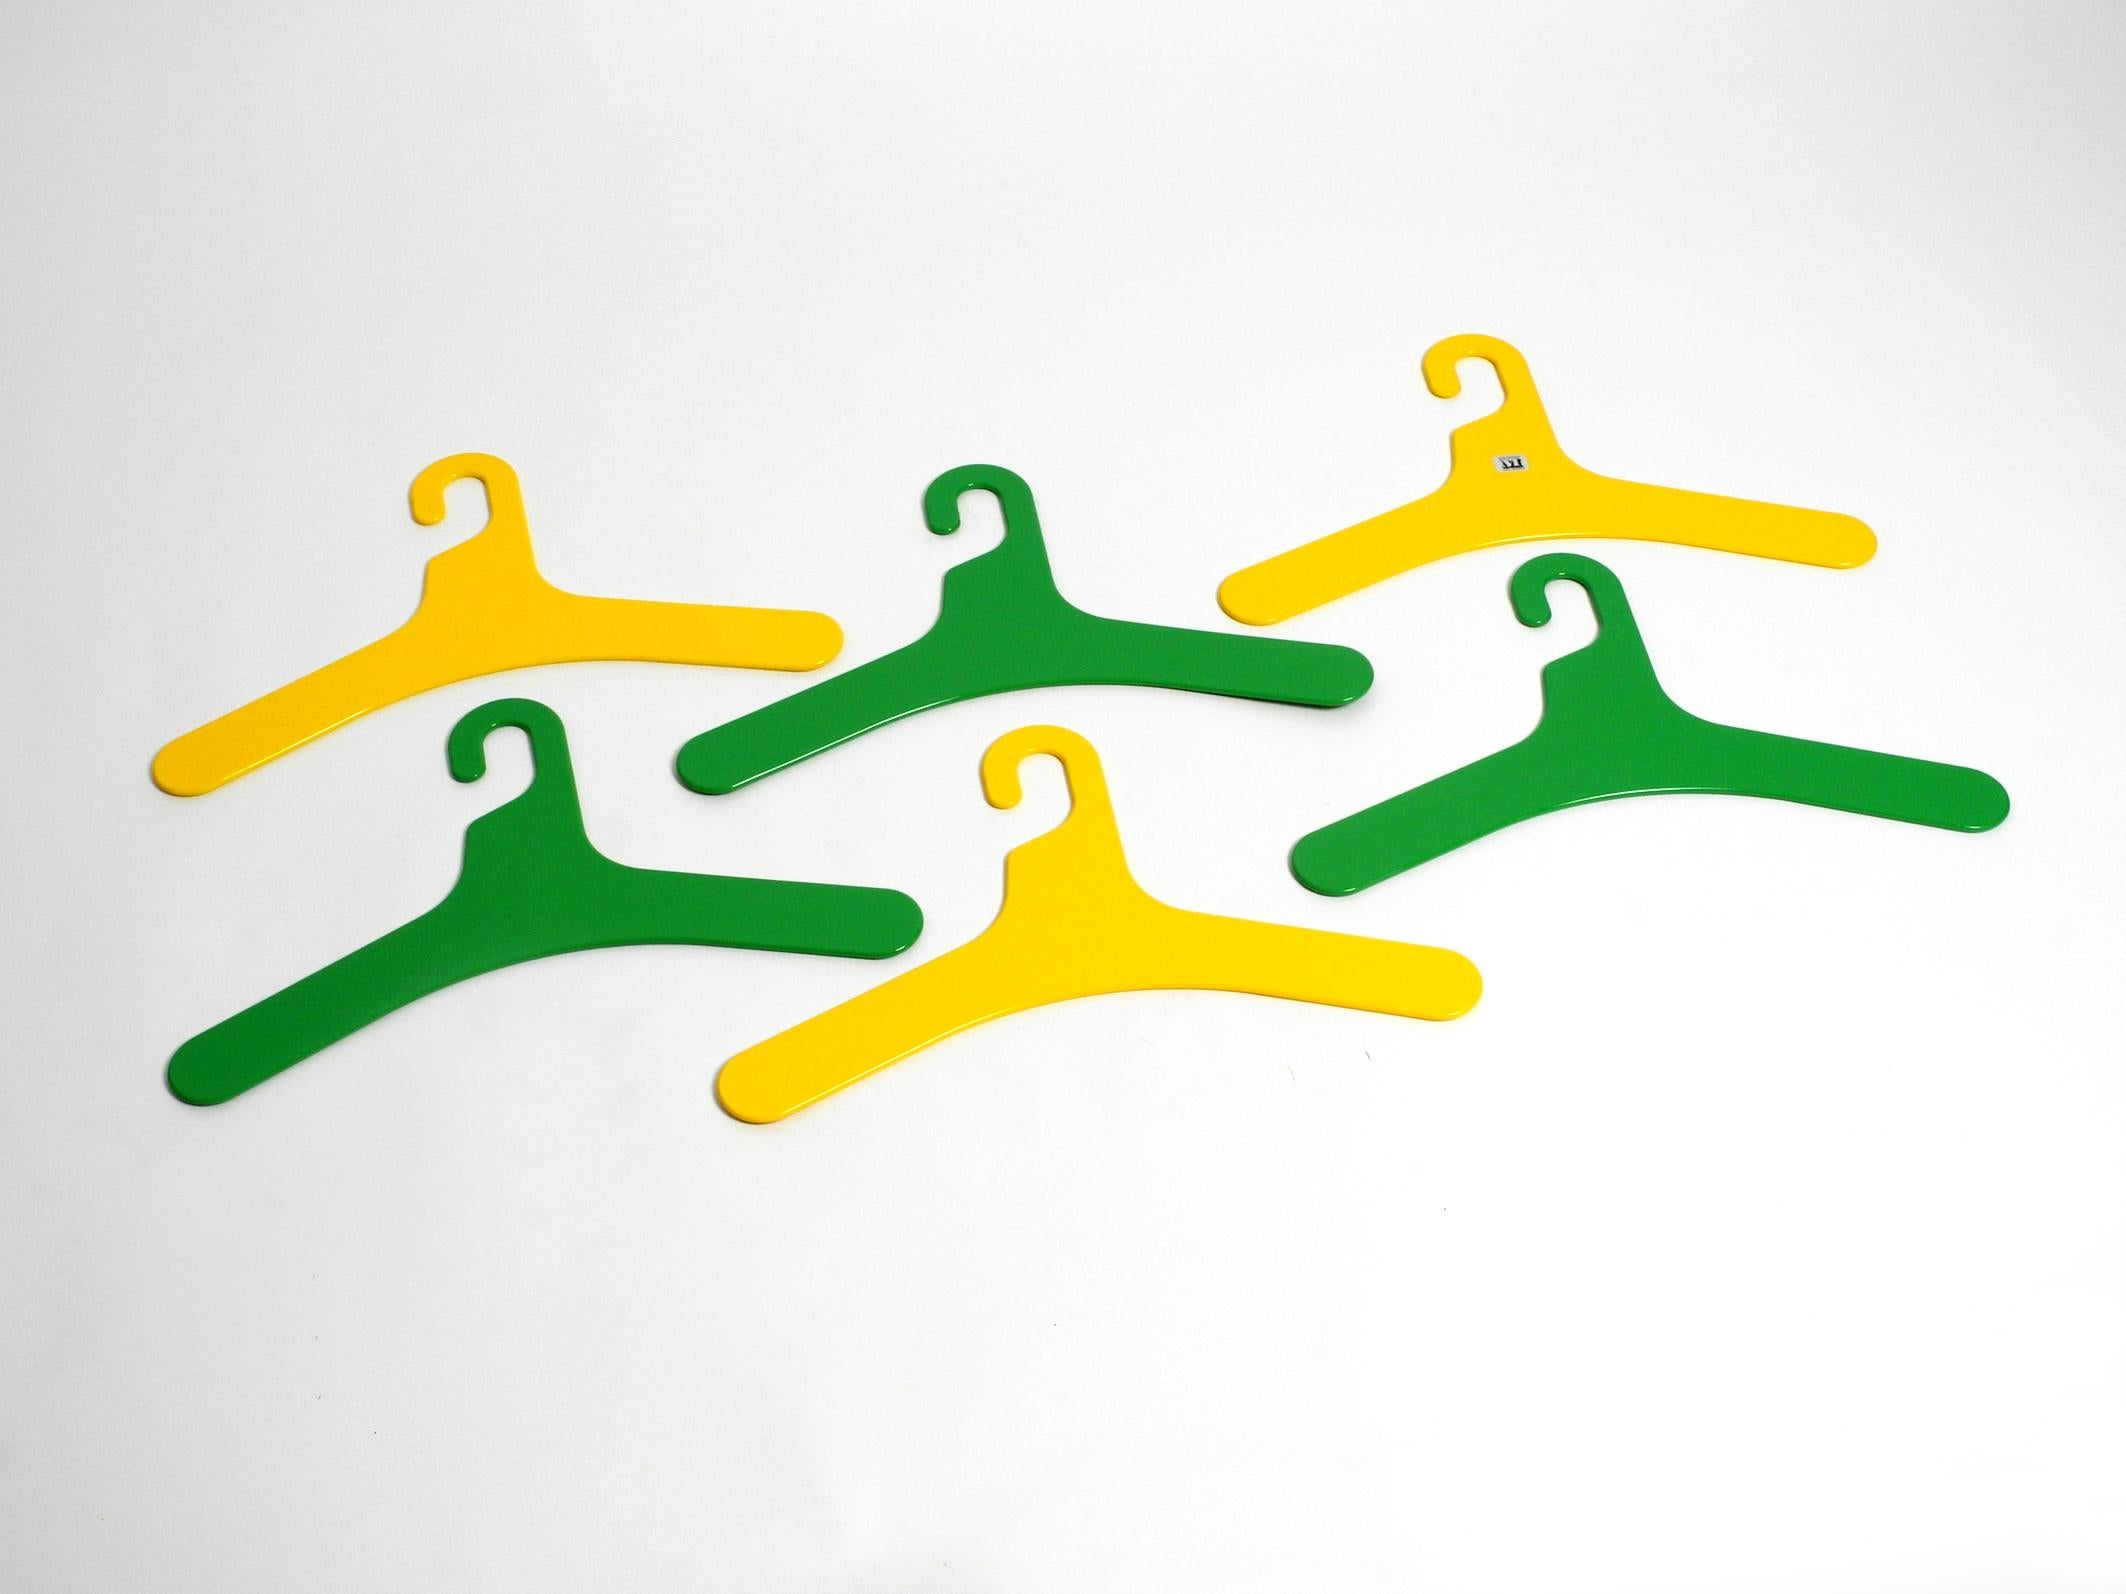 German 6 unused 1970s yellow and green plastic hangers by Ingo Maurer for Design M